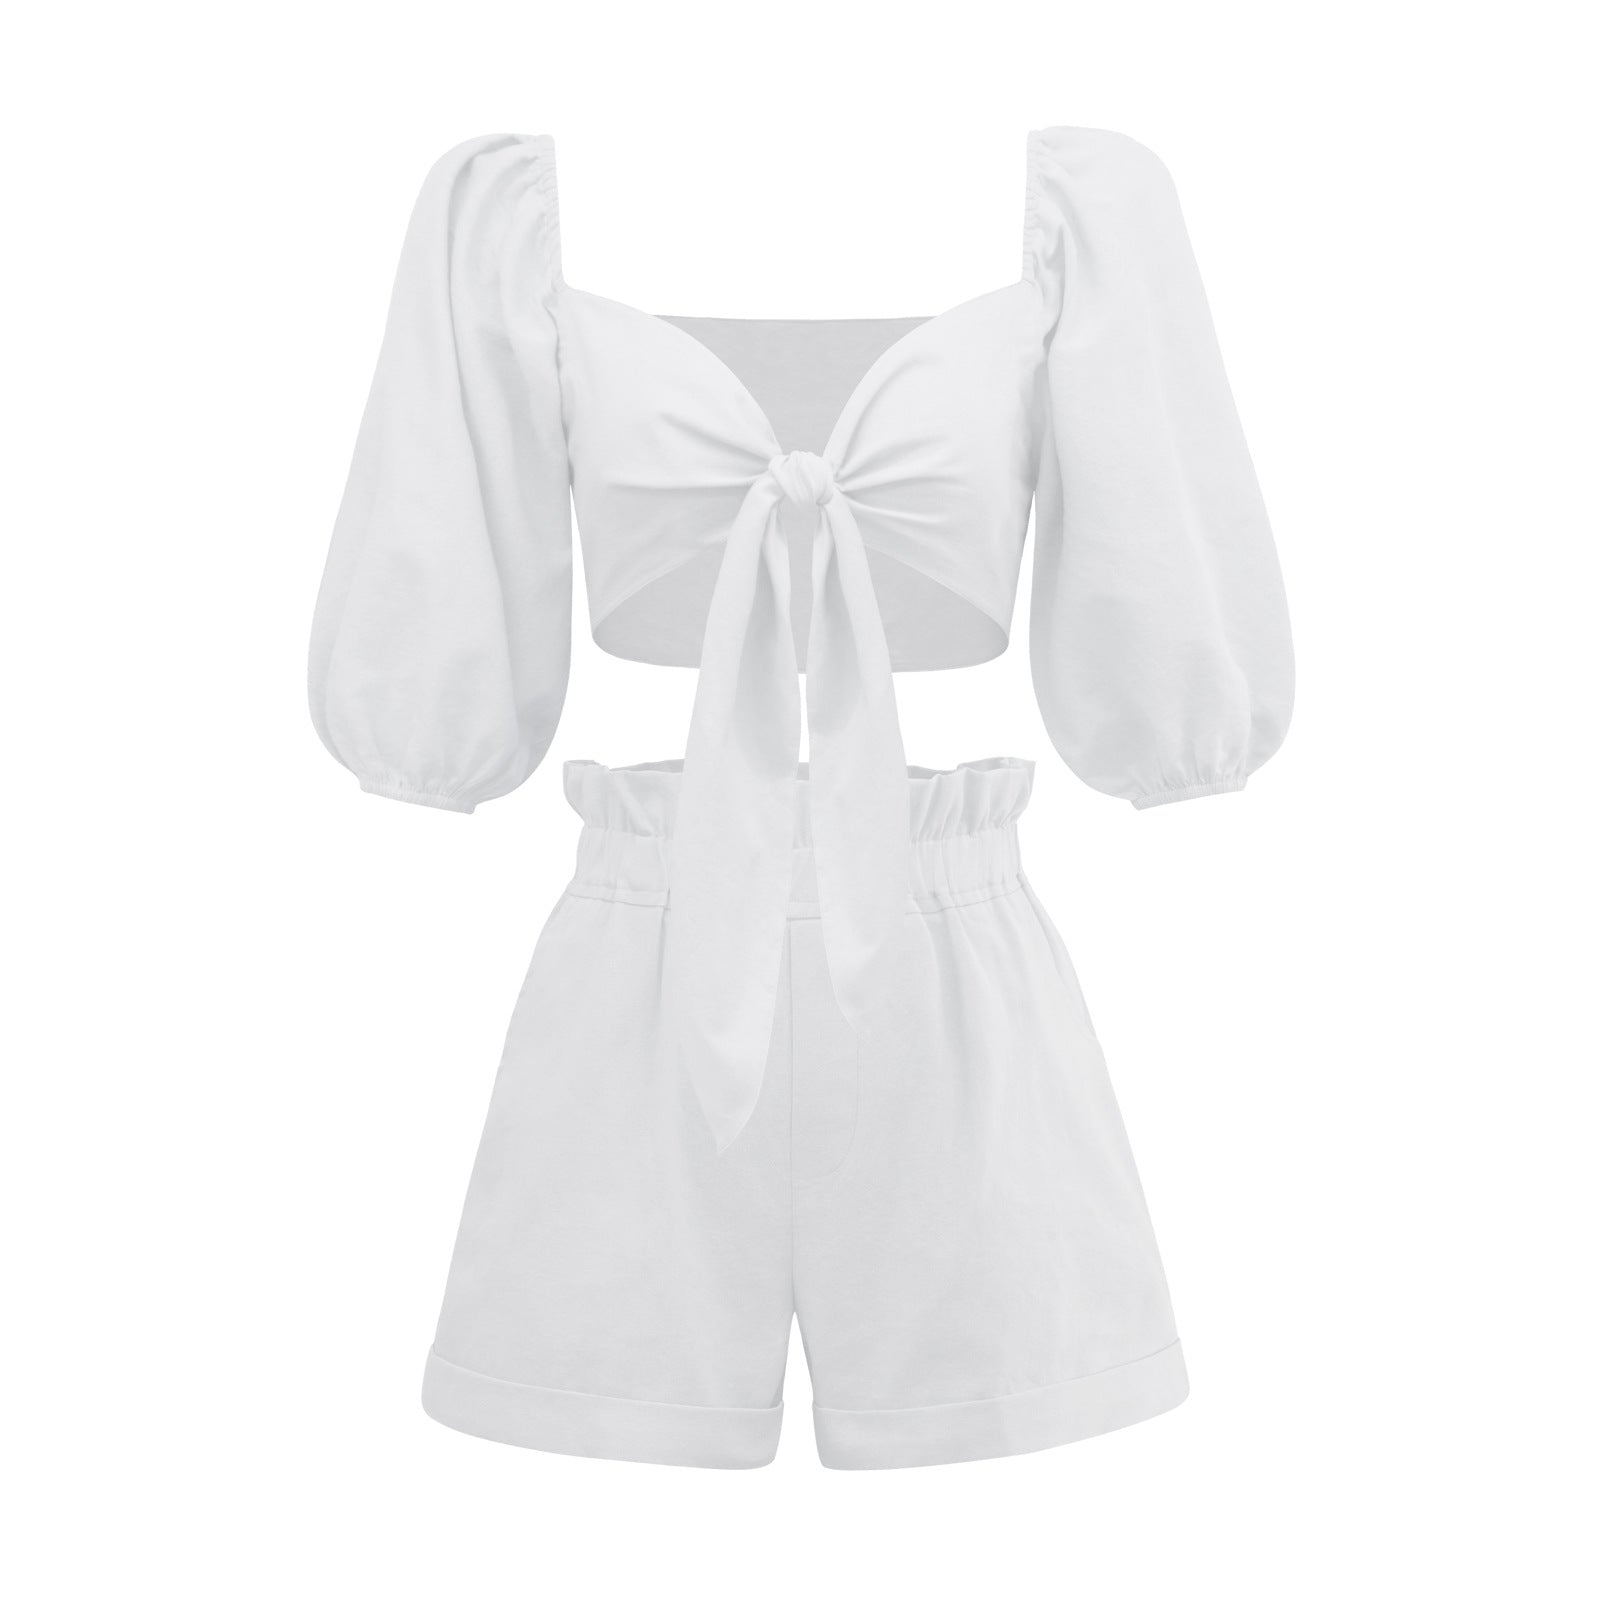 Casual Short Midriff Baring Tops and Shorts Sets for Women-Suits-White-S-Free Shipping Leatheretro